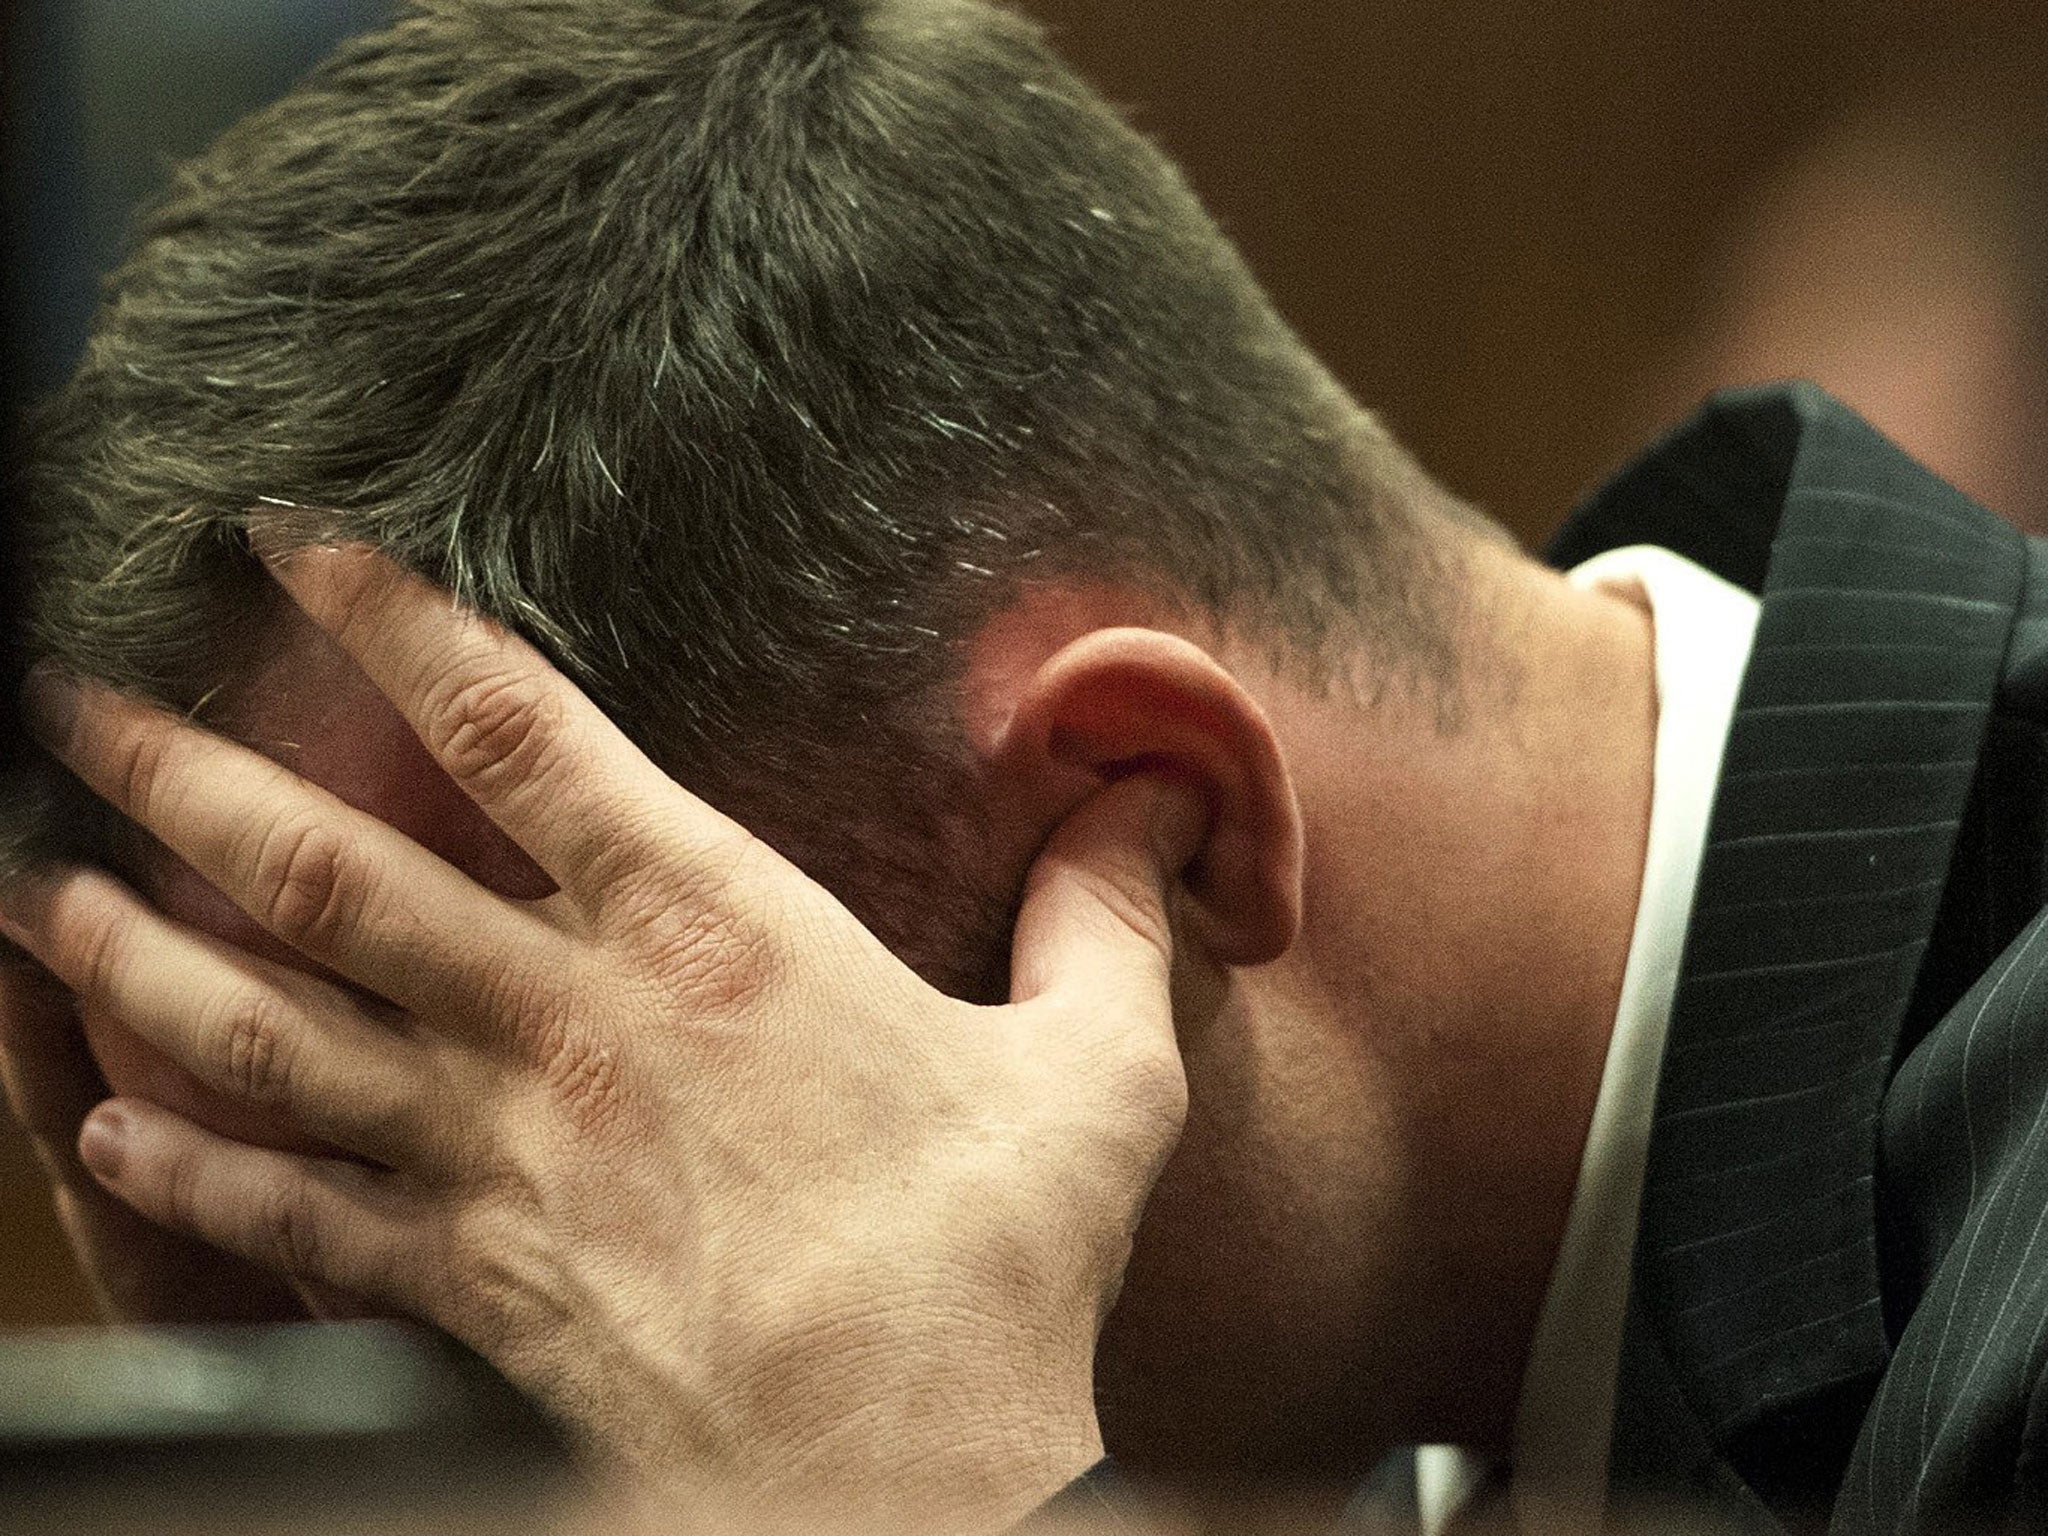 Oscar Pistorius holds his head in his hands in the dock during cross examination of a witnesses in court in Pretoria